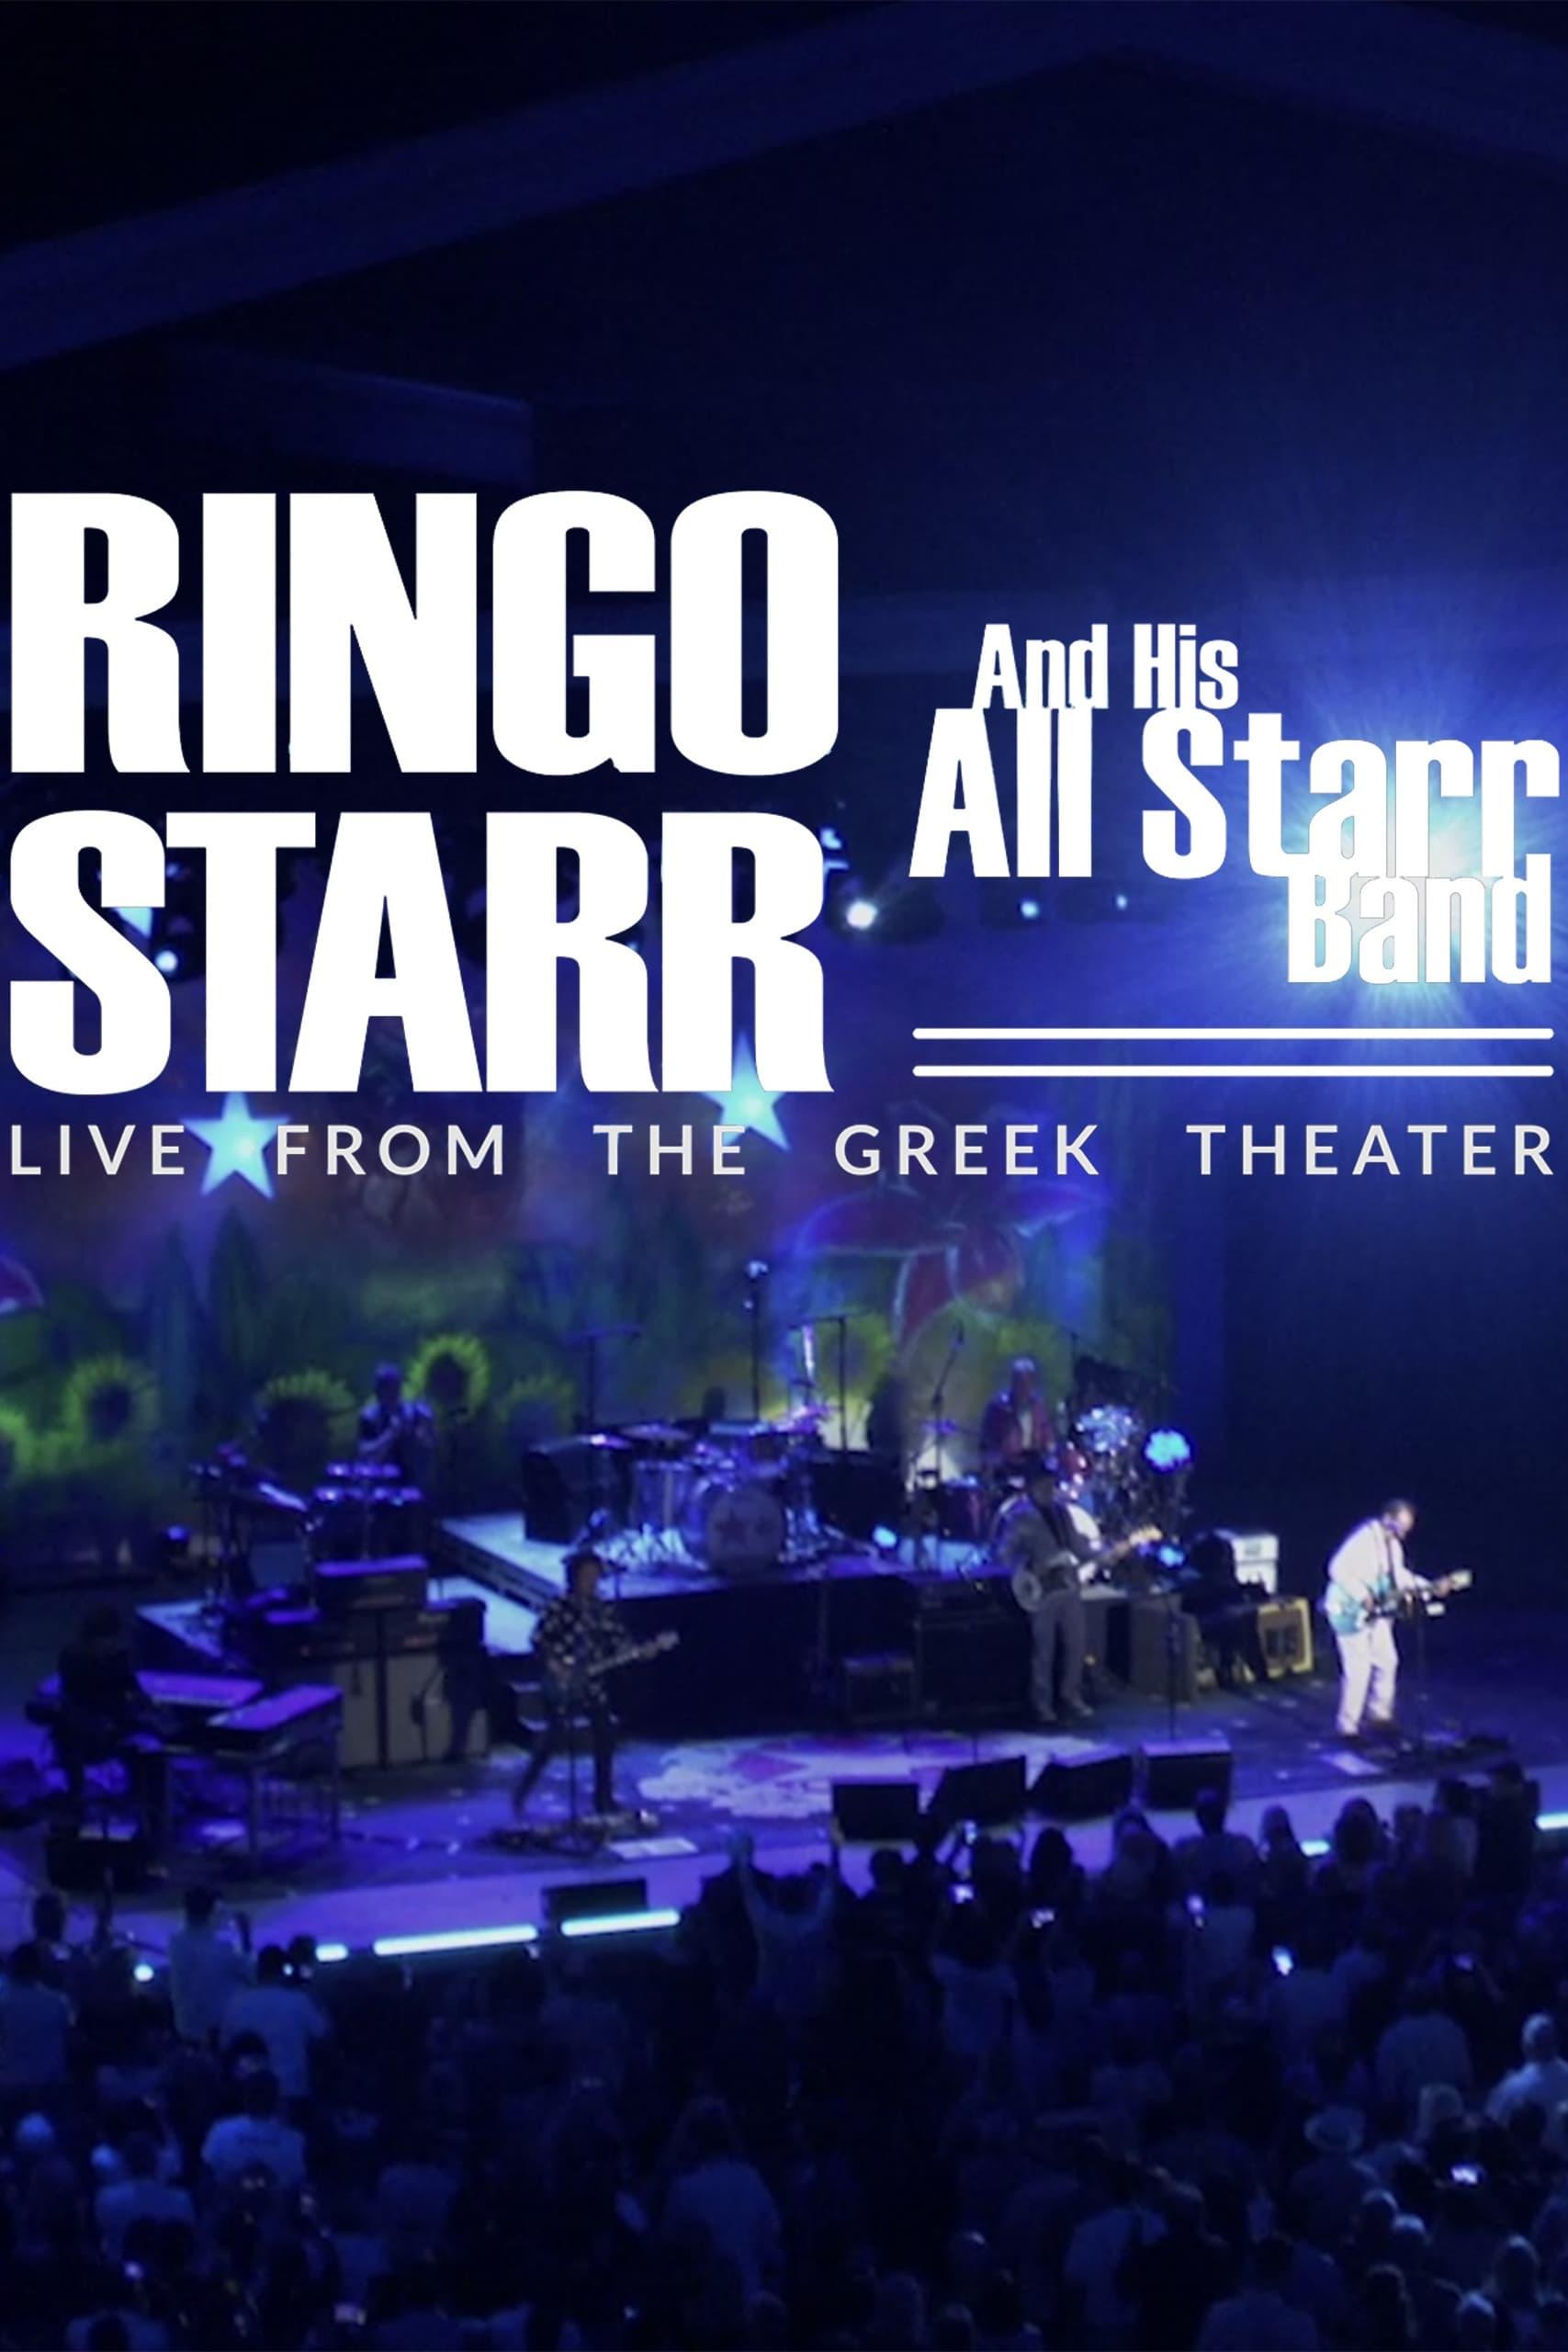 Ringo Starr and His All-Starr Band: Live at the Greek Theater 2019 poster